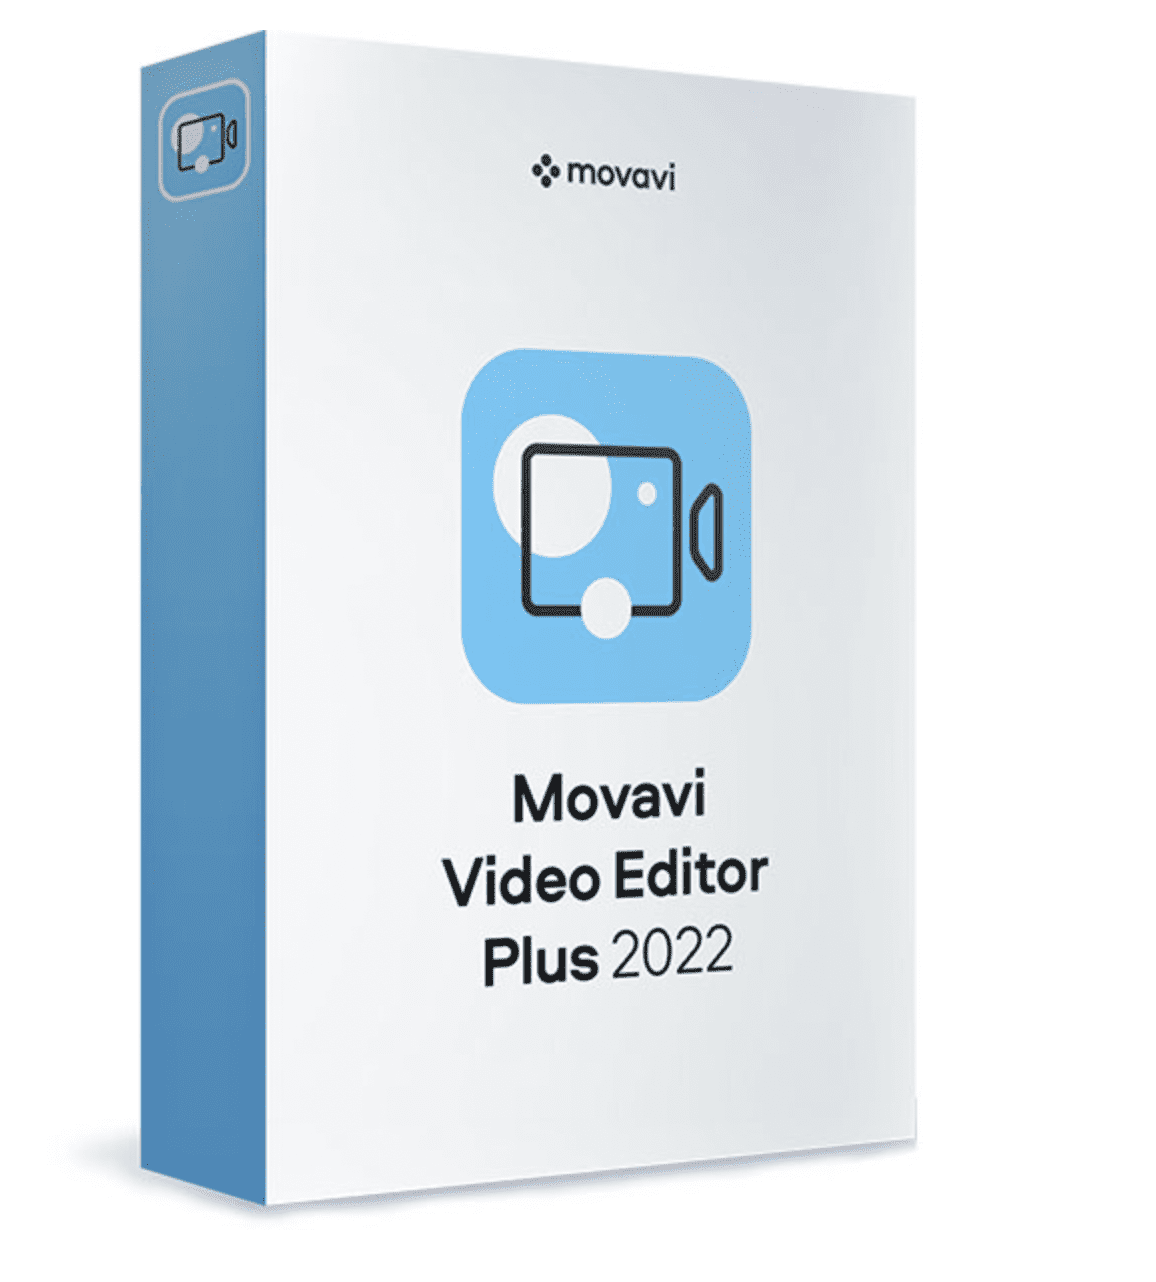 Best claymation video maker for beginners- Movavi video editor